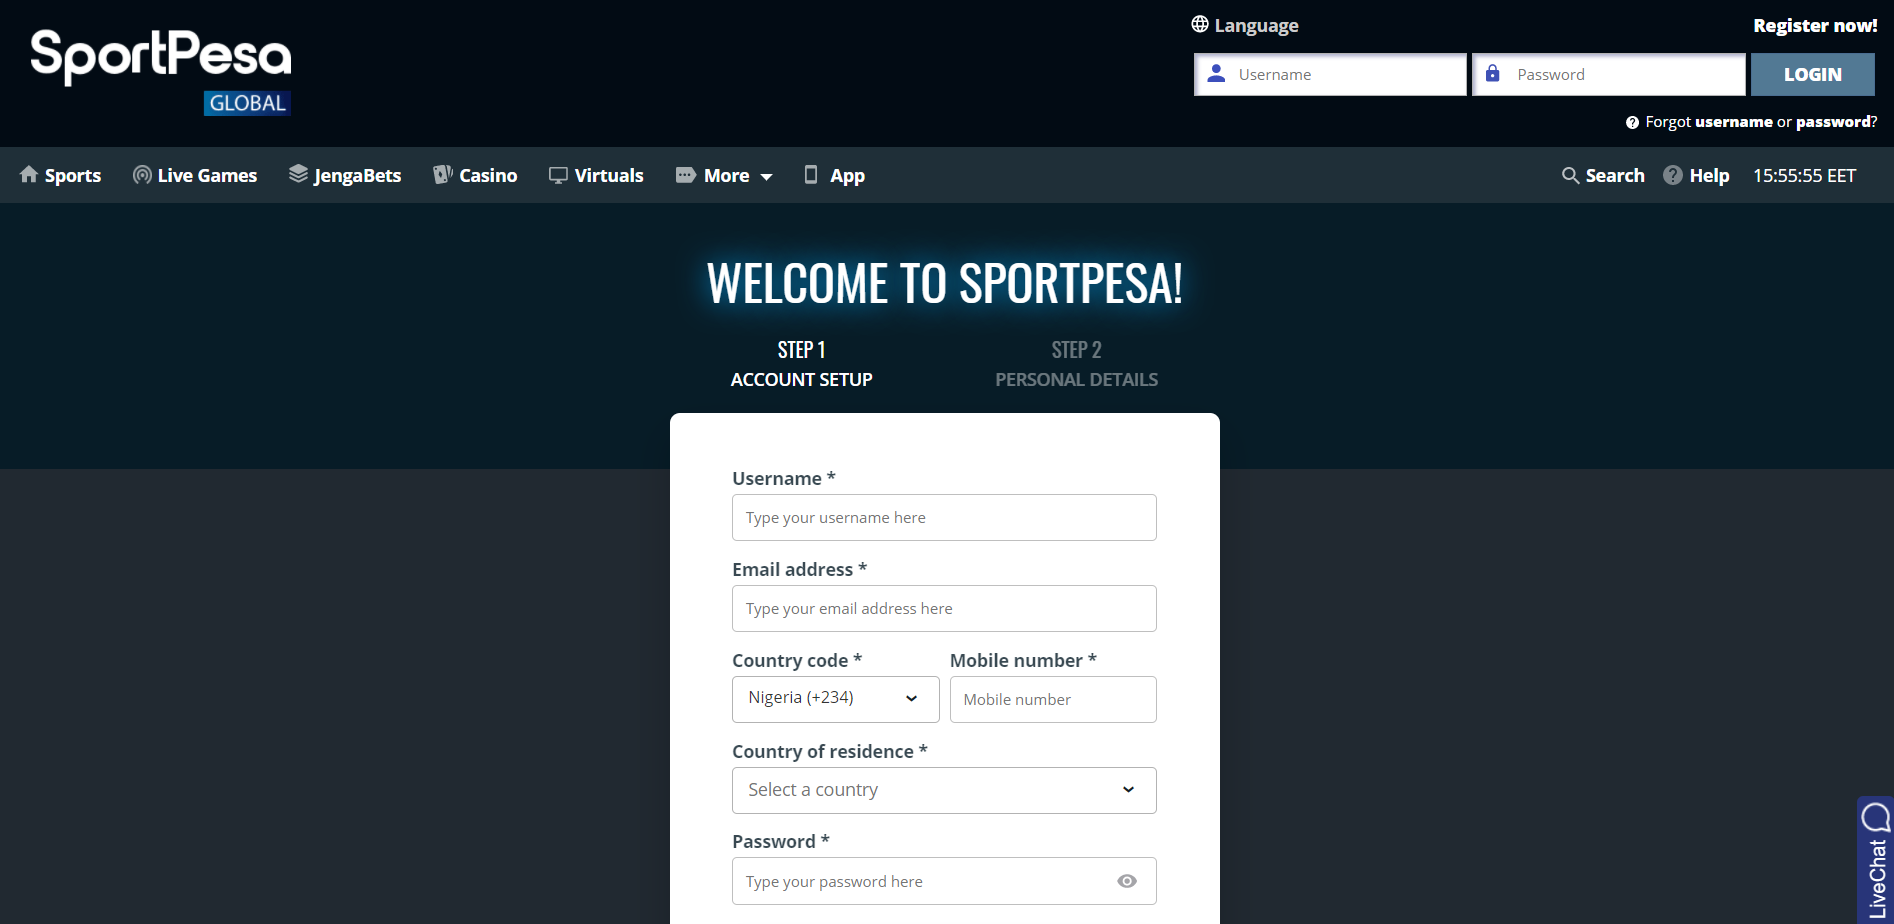 What does a Sportpesa registration give to a player?